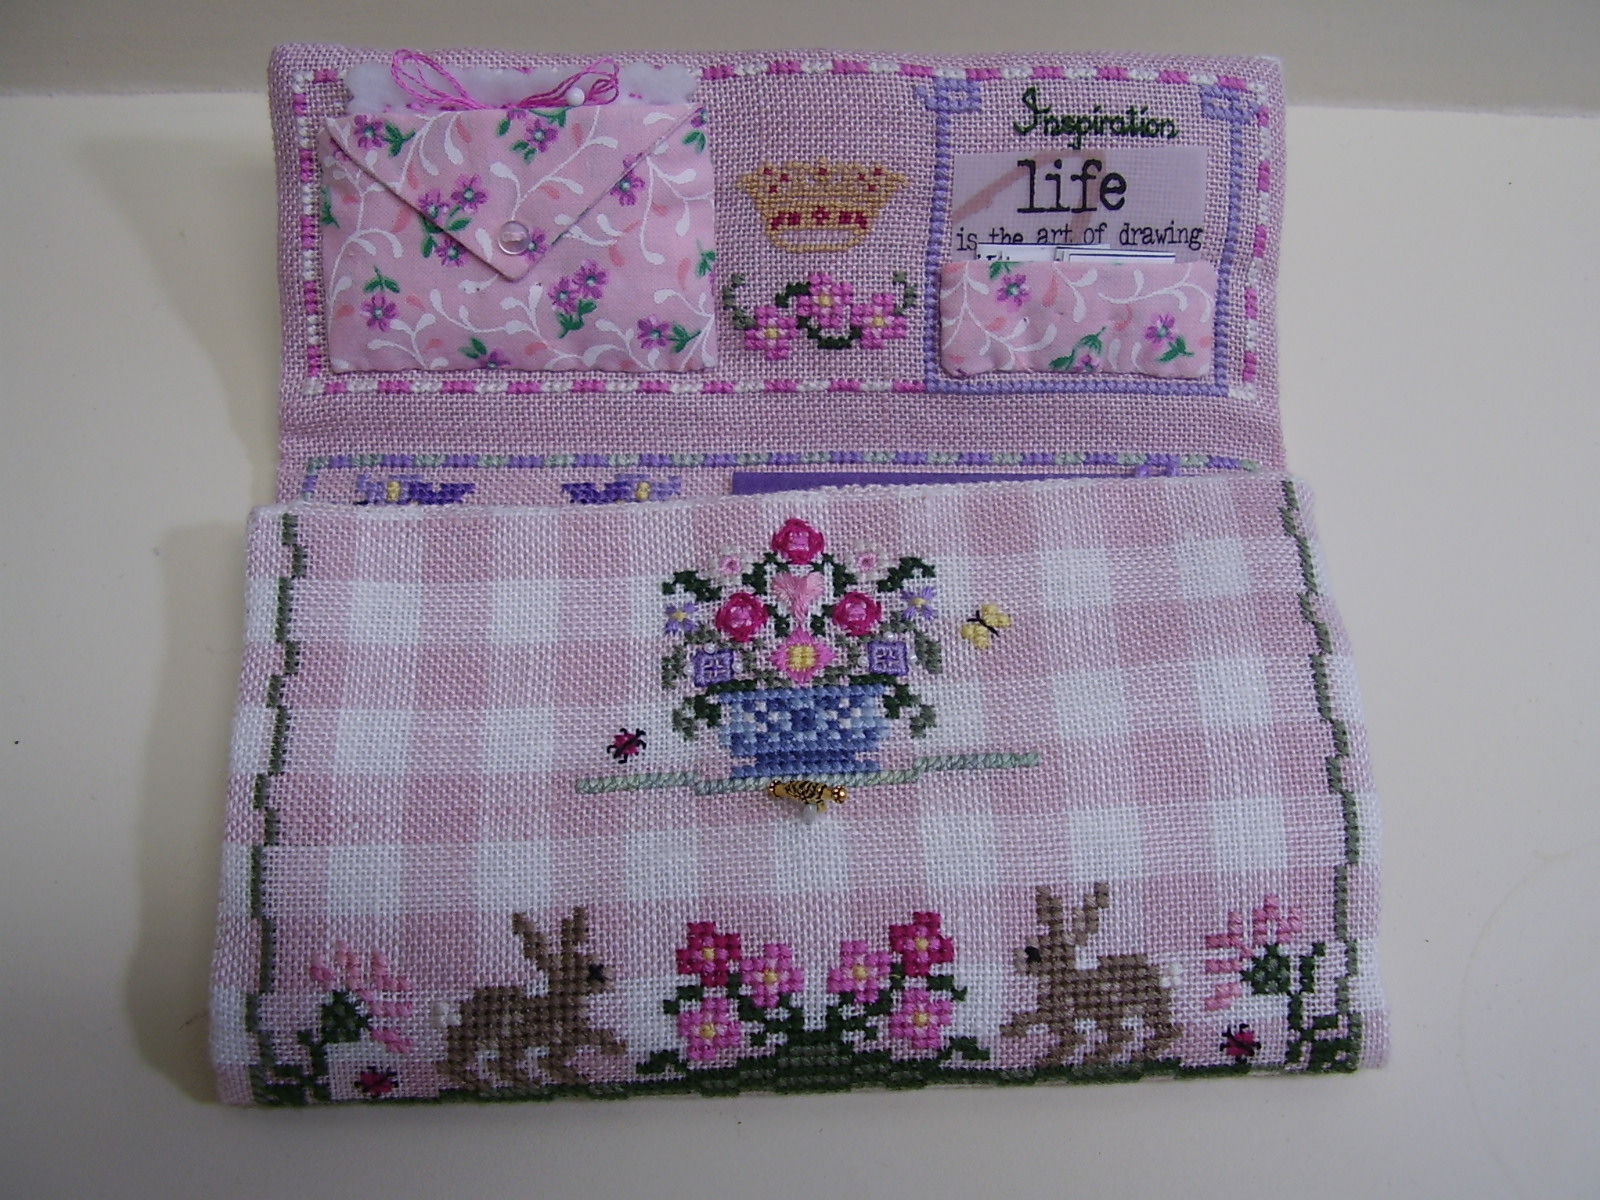 [Queen+of+Needle+Sampler+Sewing+Case+View+3+by+Just+Nan.JPG]